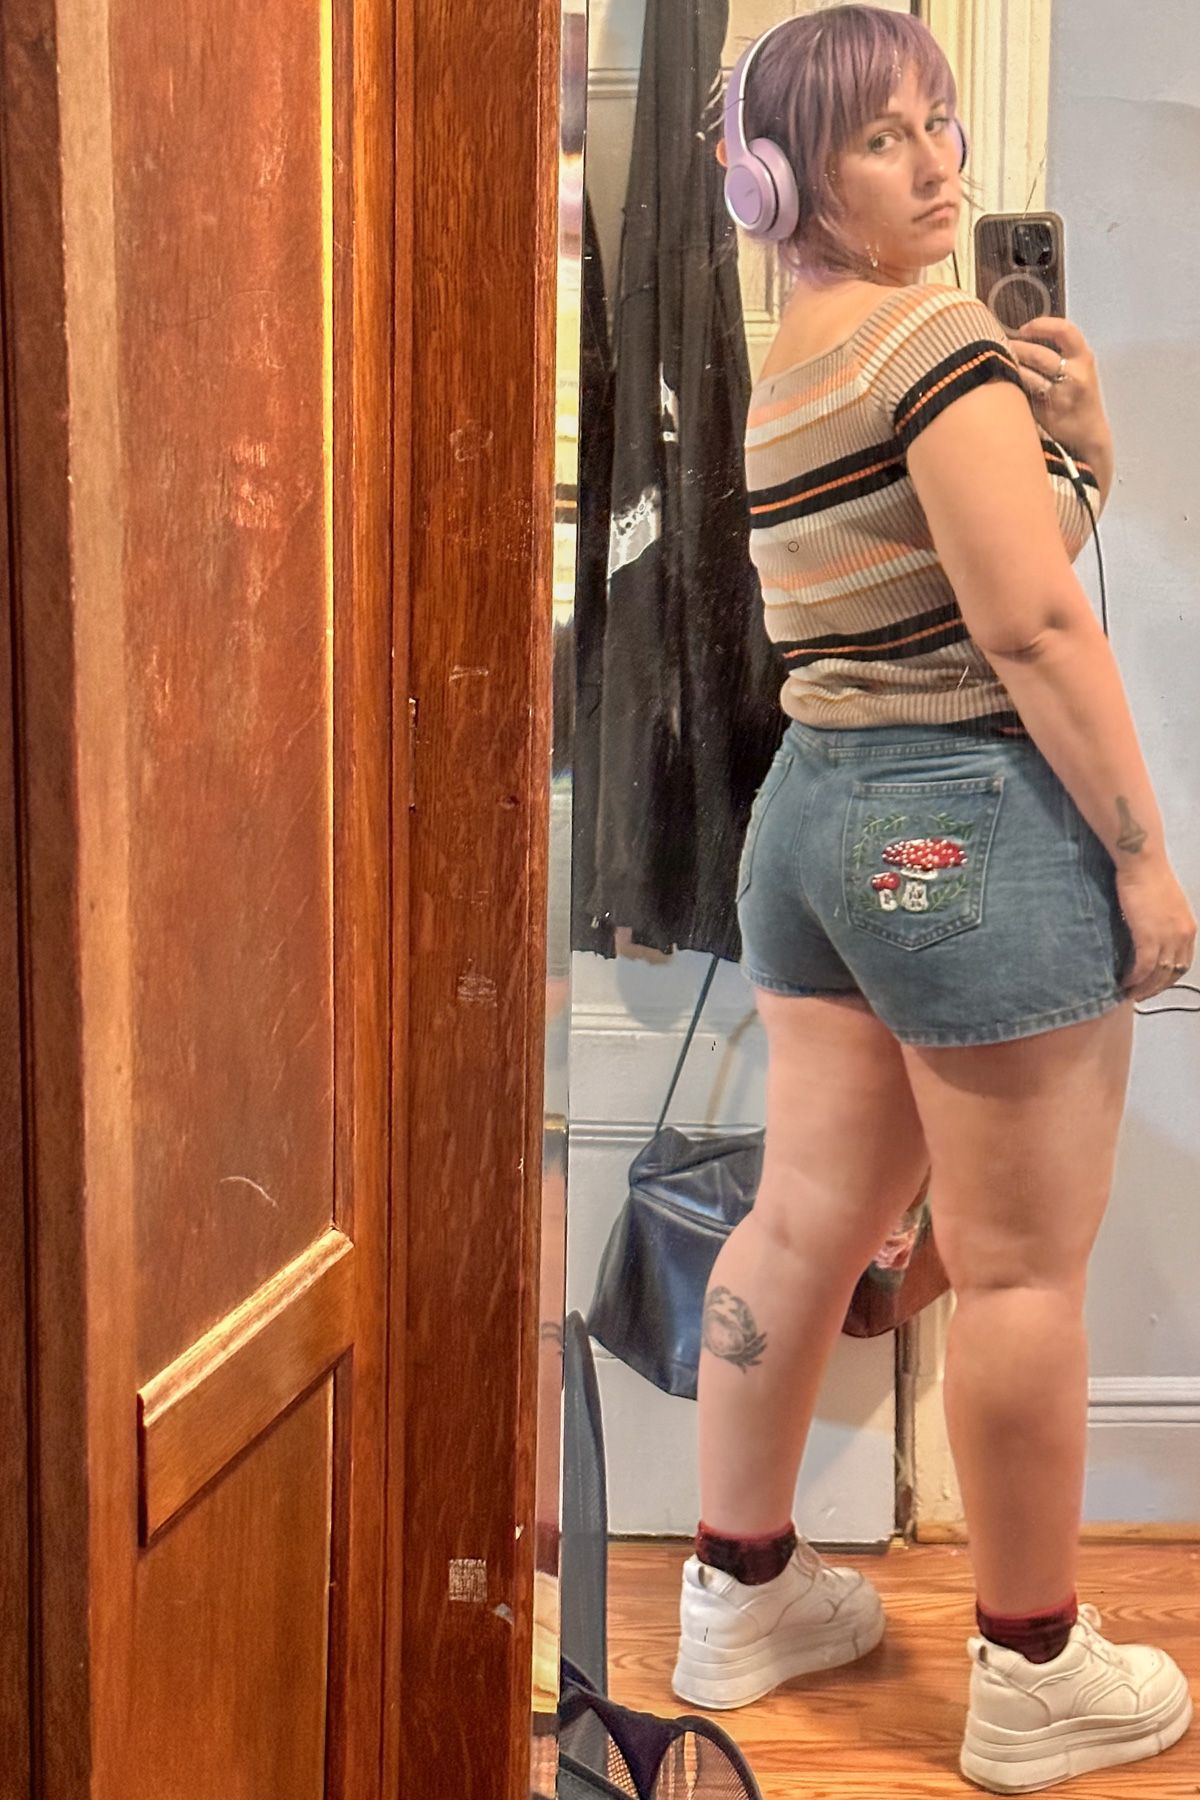 A purple-haired woman wearing jean shorts with a mushroom embroidered on the back pocket and a striped t-shirt takes a mirror selfie over her shoulder in a bedroom mirror.